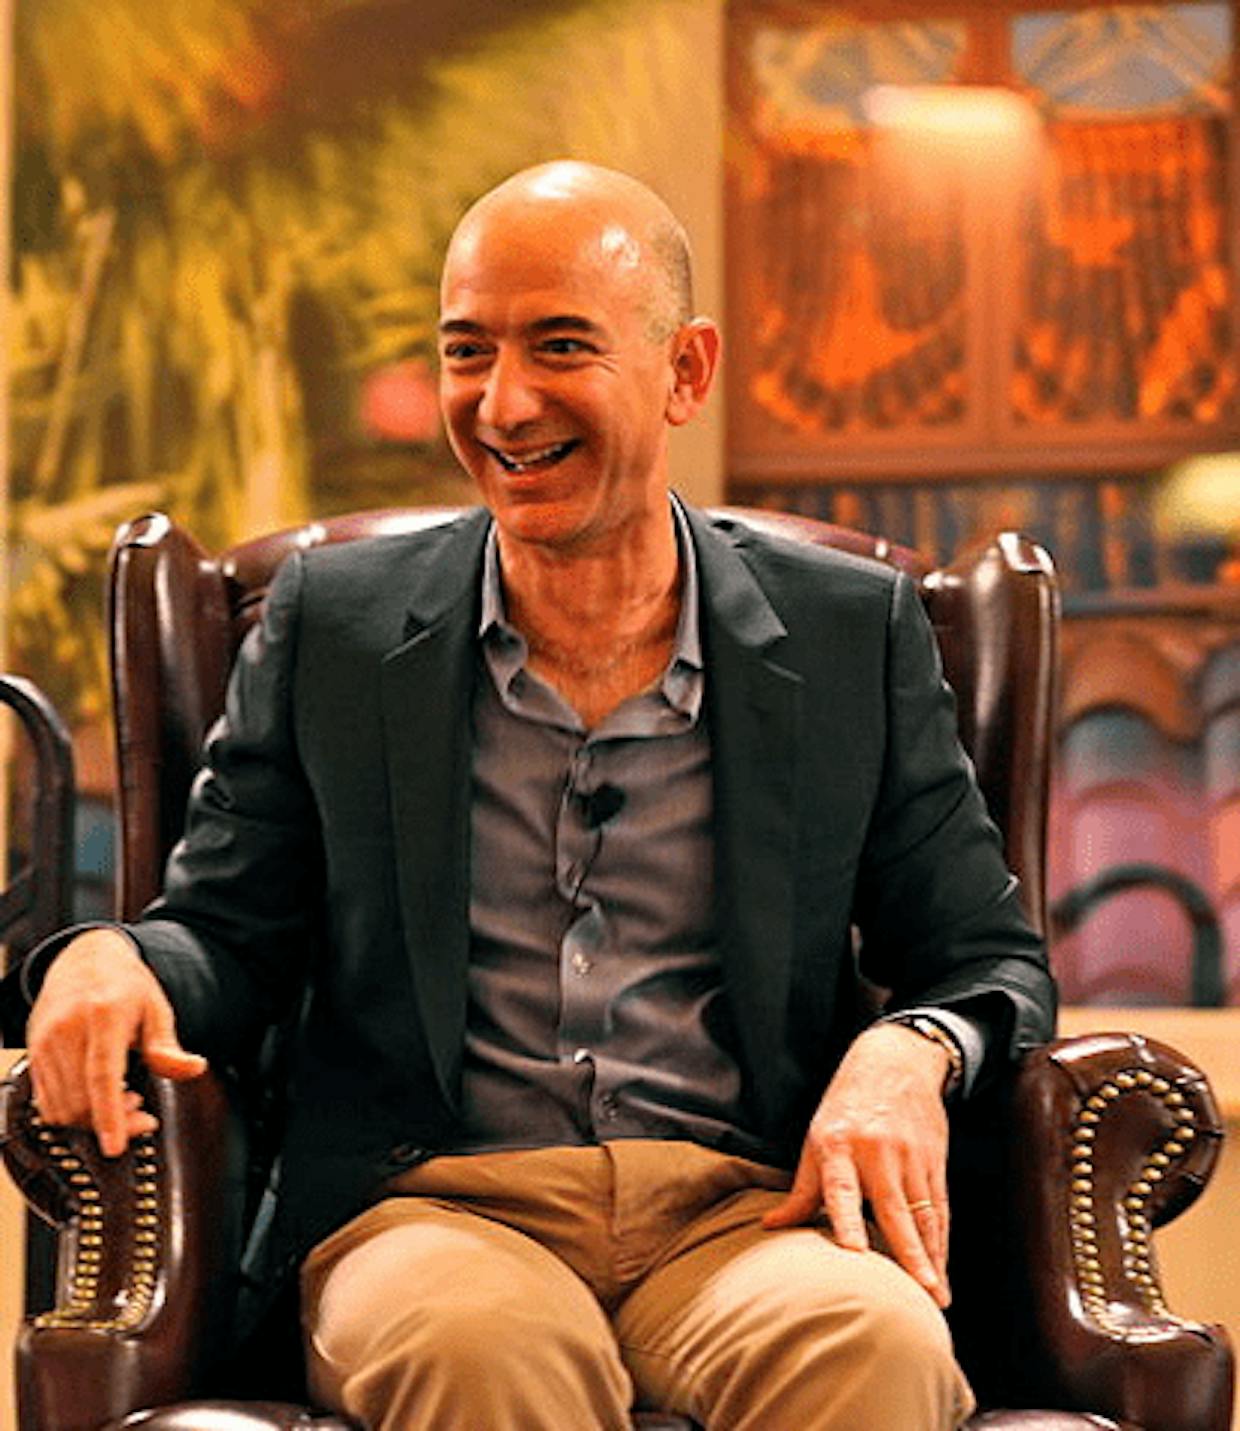 Source: By Steve Jurvetson - Flickr: Bezos’ Iconic Laugh, CC BY 2.0, 